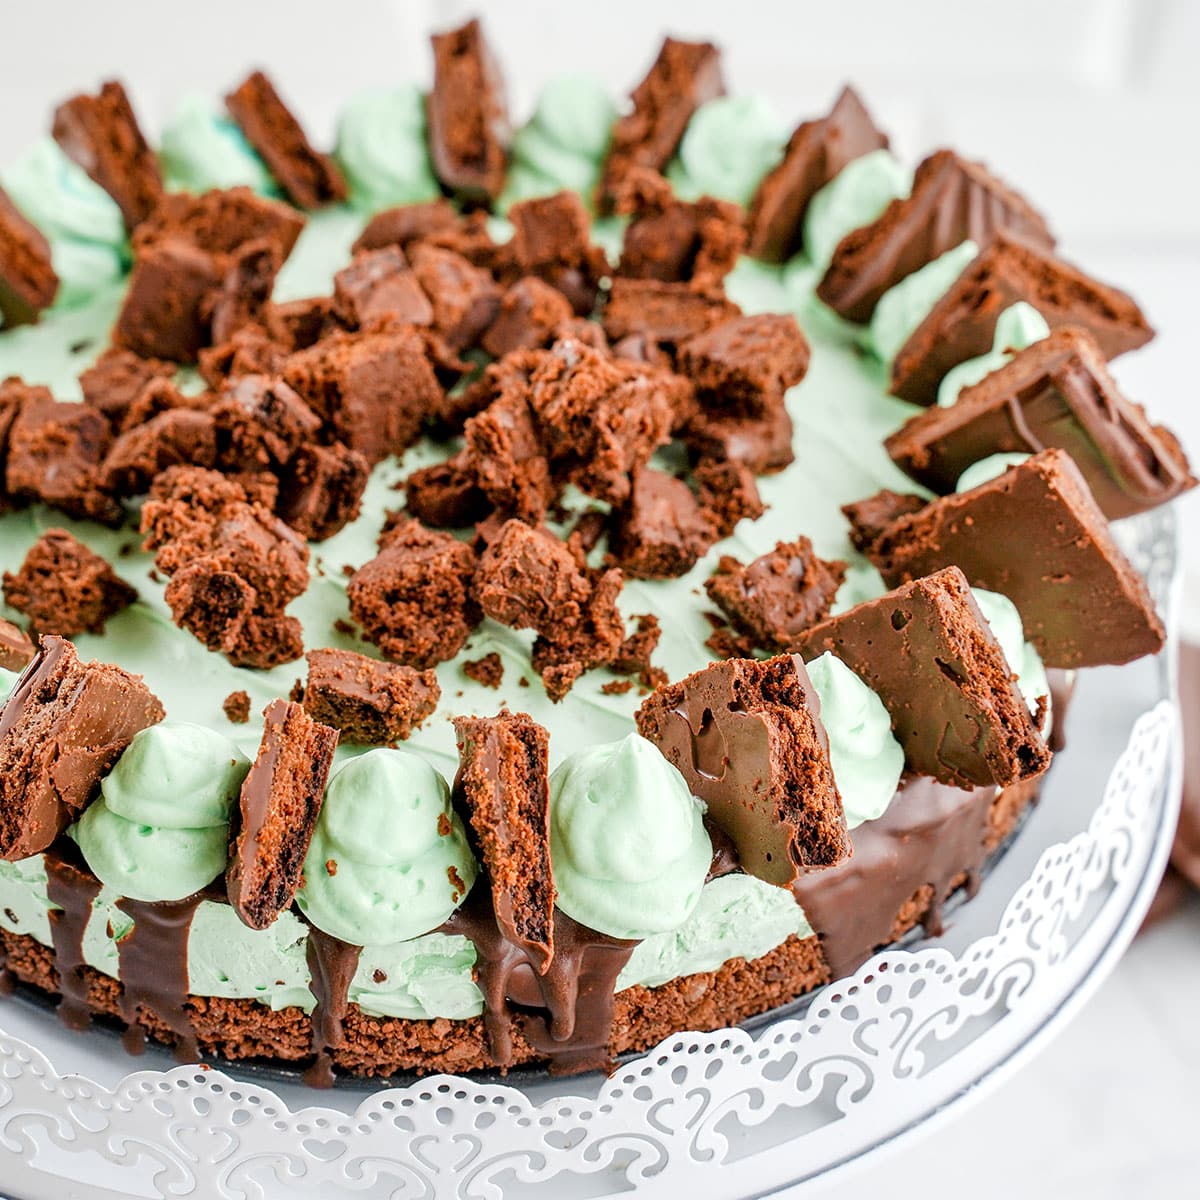 Thin Mint Cheesecake best to share with others.